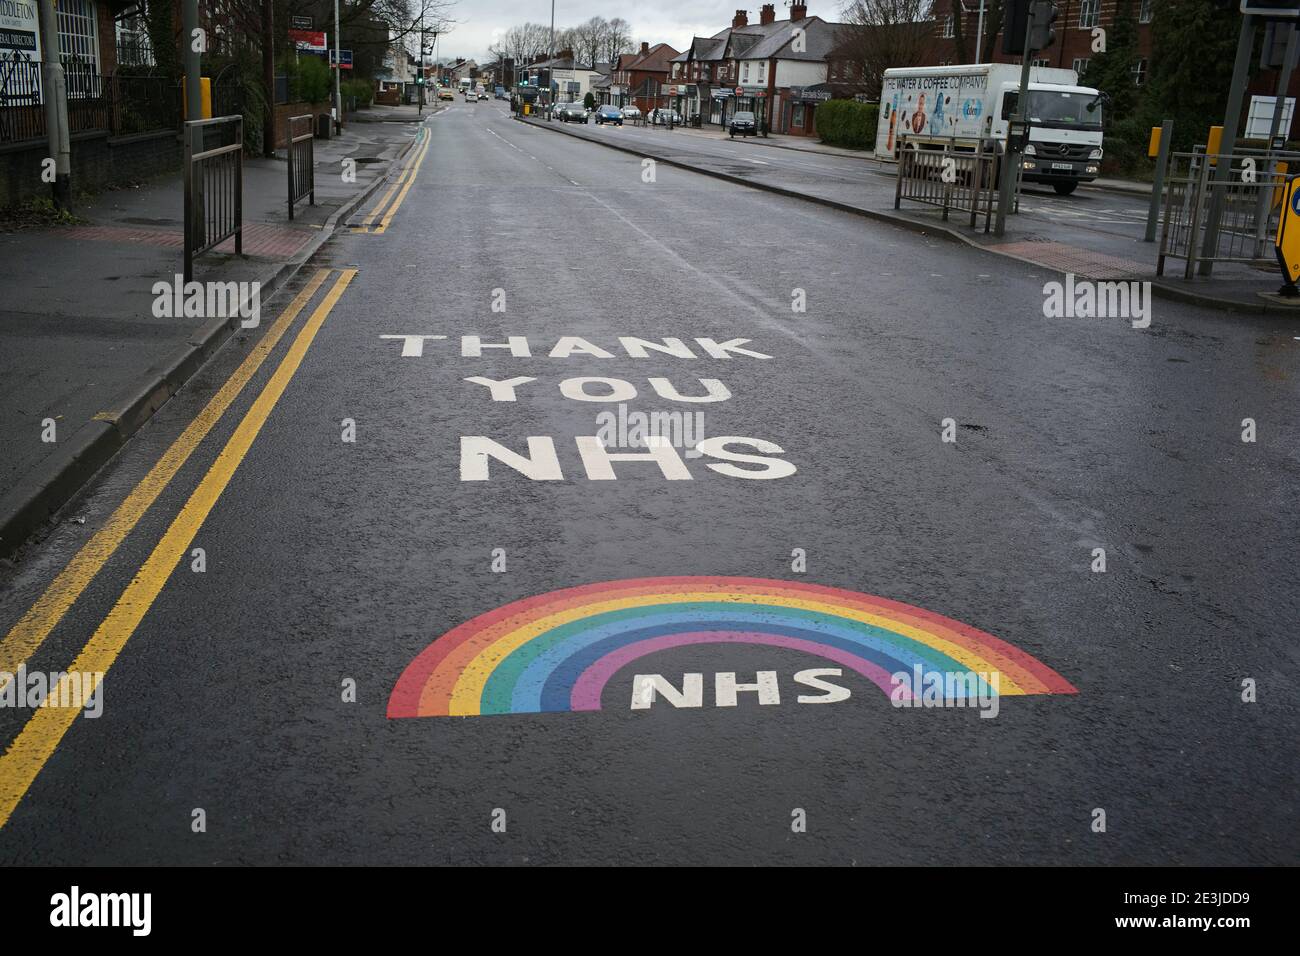 Image shows a painted sign on London Road, Stockport, outside Stepping Hill Hospital thanking NHS workers for their help during the Covid 19 pandemic. Stock Photo